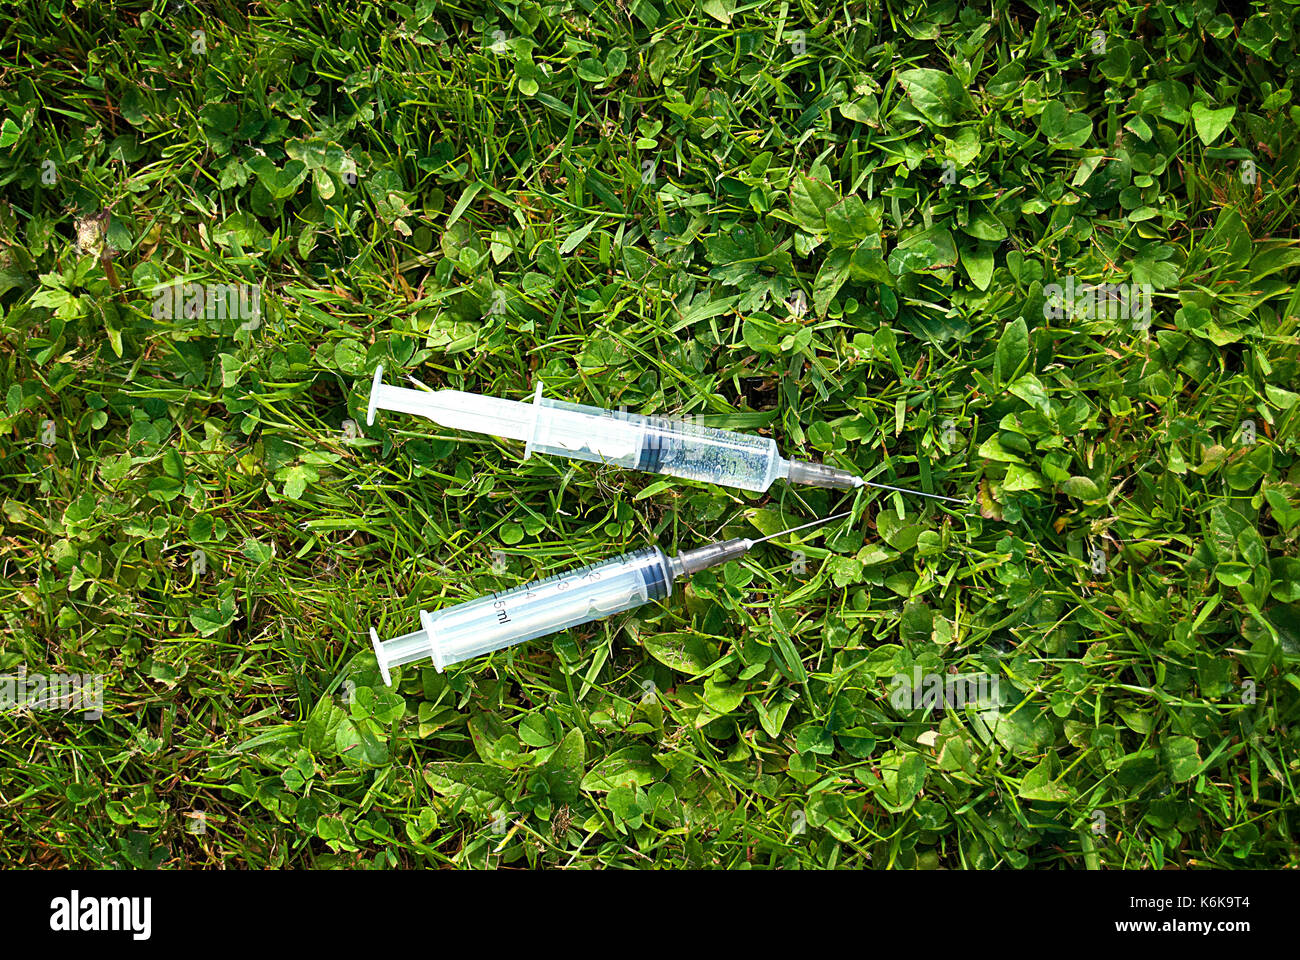 Syringe found in the grass Stock Photo